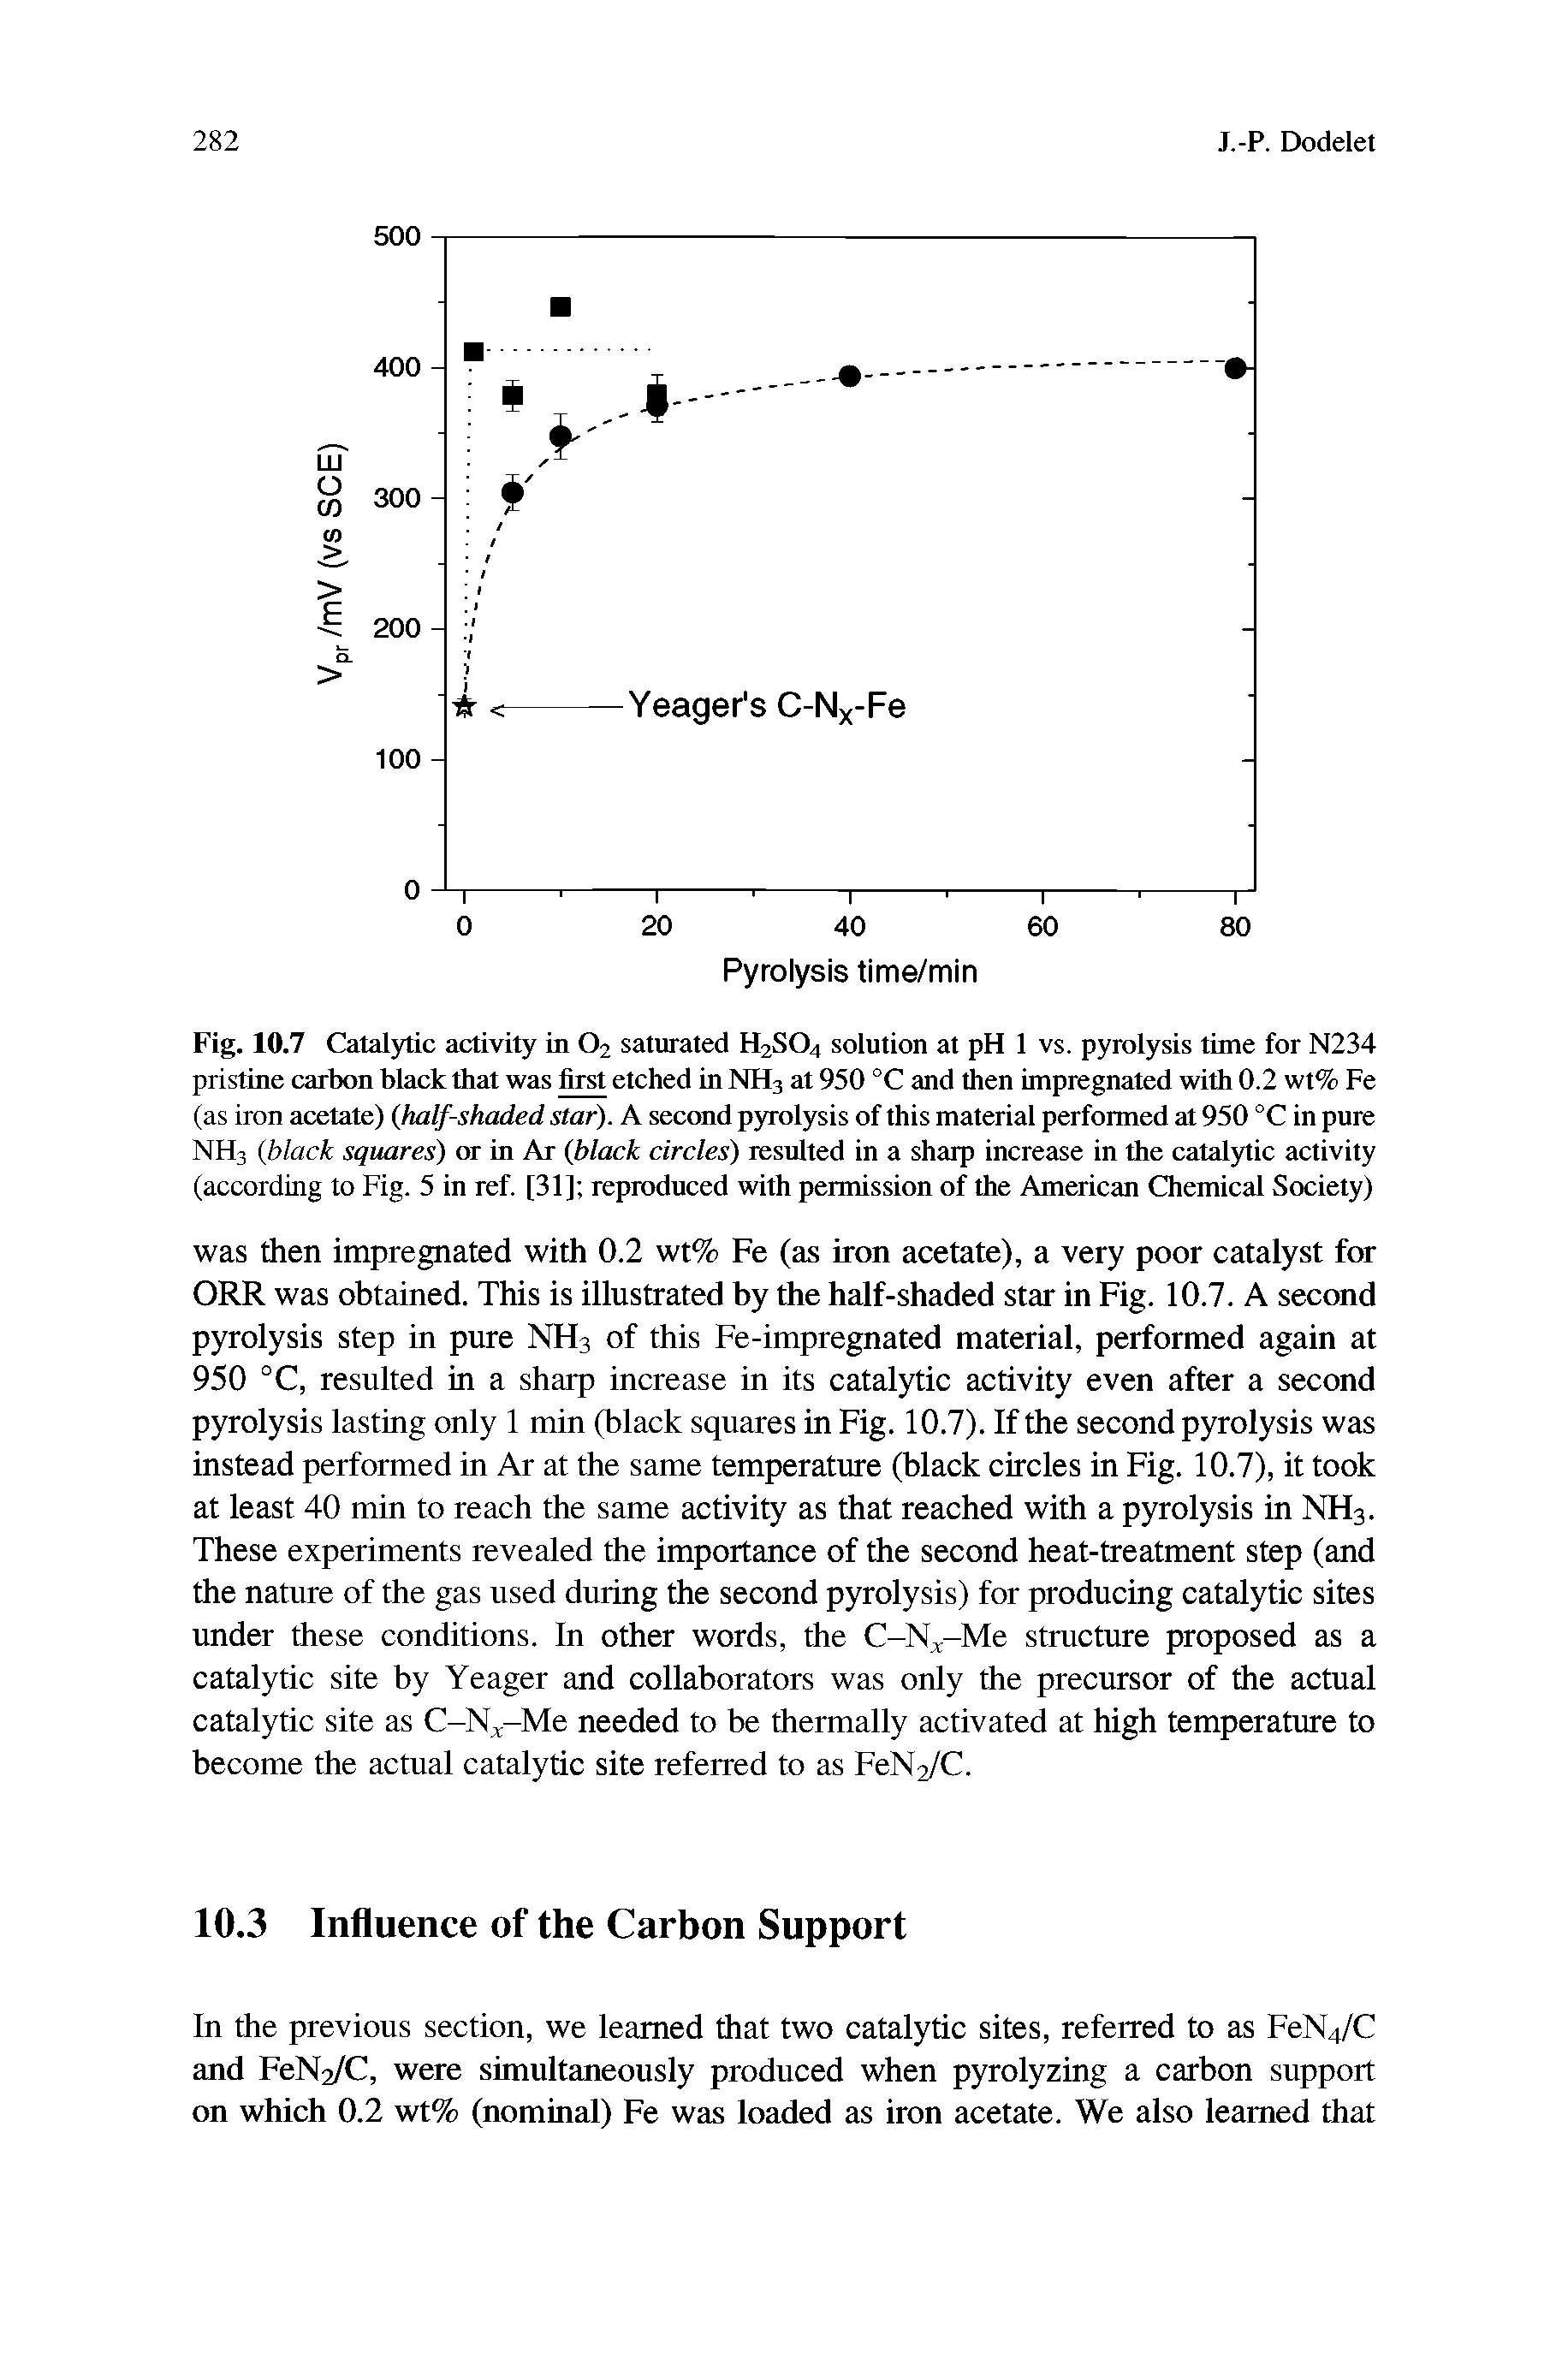 Fig. 10.7 Catalytic activity in O2 satiffated H2SO4 solution at pH 1 vs. pyrolysis tune for N234 pristine carlxtn black that was first etched in NH3 at 950 °C and then impregnated with 0.2 wt% Fe (as iron acetate) half-shaded star). A second pyrolysis of this material performed at 950 °C in pure NH3 black squares) ot in Ar black circles) resulted in a sharp increase in the catalytic activity (according to Fig. 5 in ref. [31] reproduced with permission of the American Chemical S(x iety)...